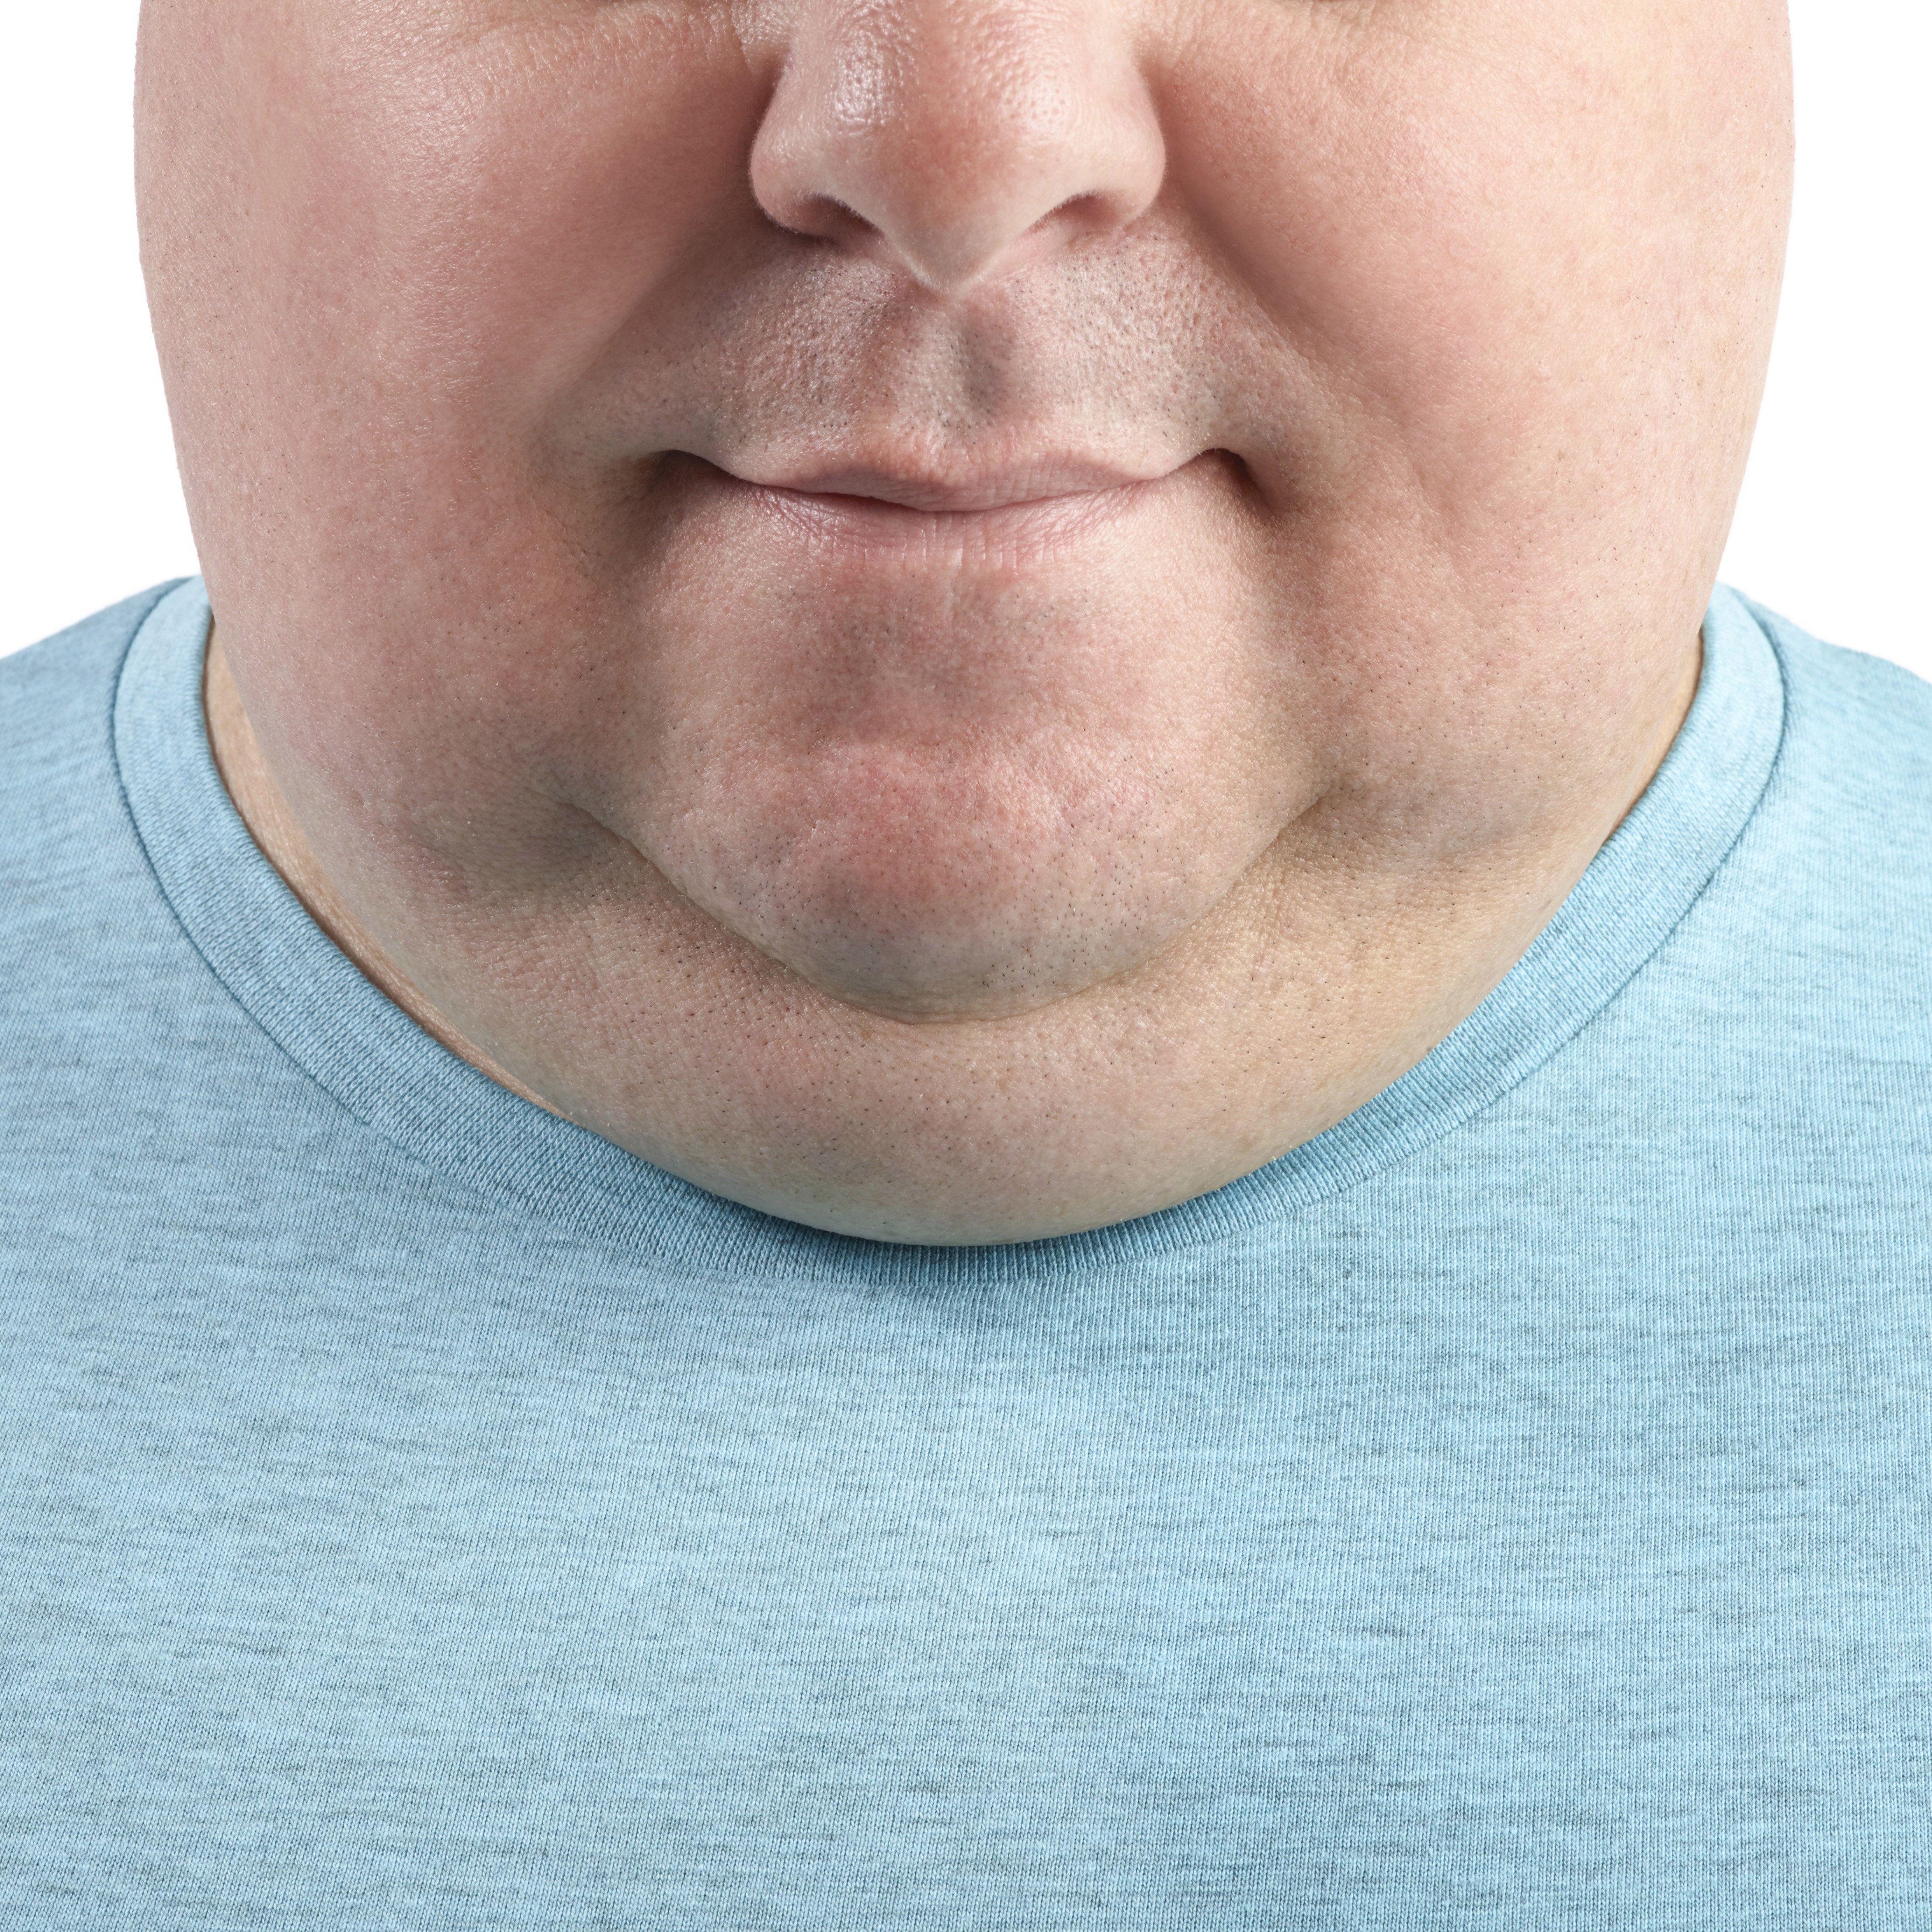 Chin exercises receding Latching: Thoughts